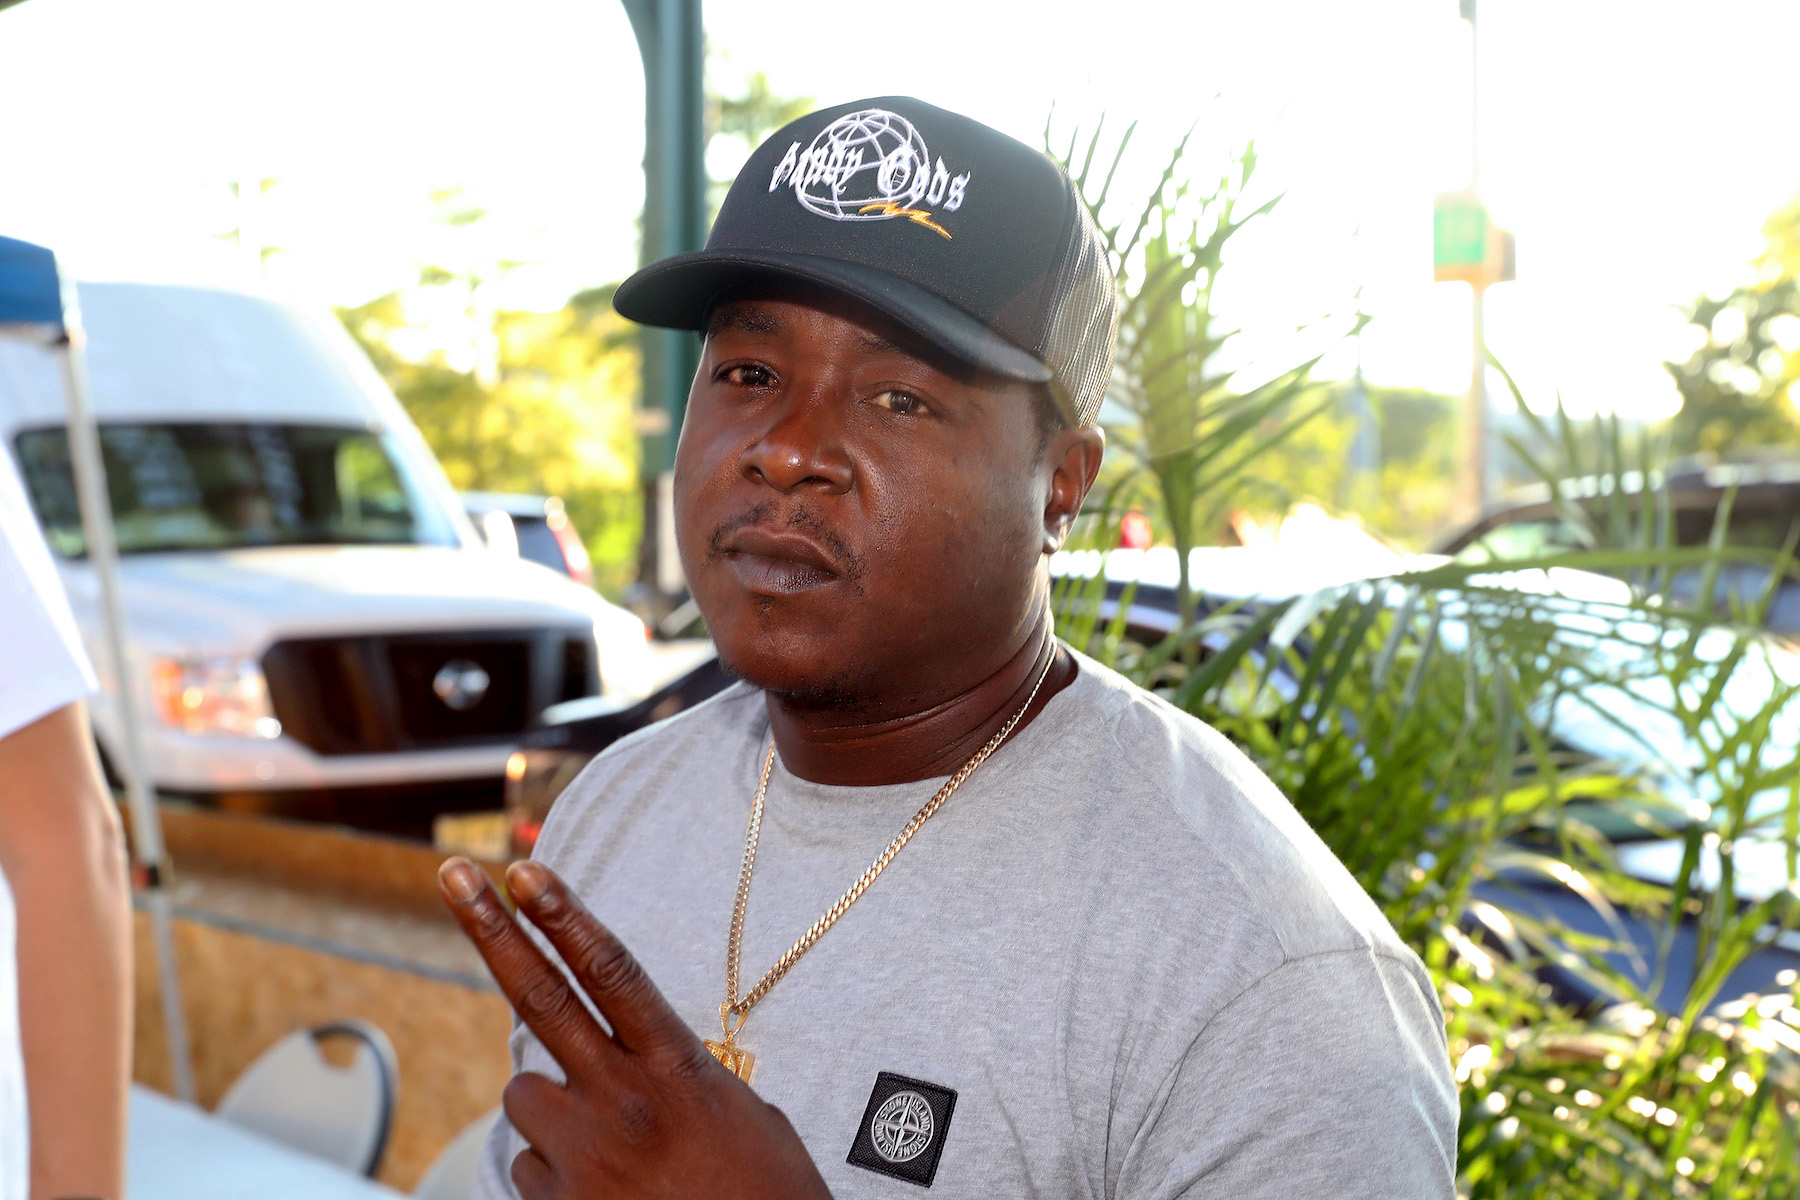 Jadakiss, who worked with The Notorious B.I.G.' on the song Last Day, posing for a photo in a grey shirt